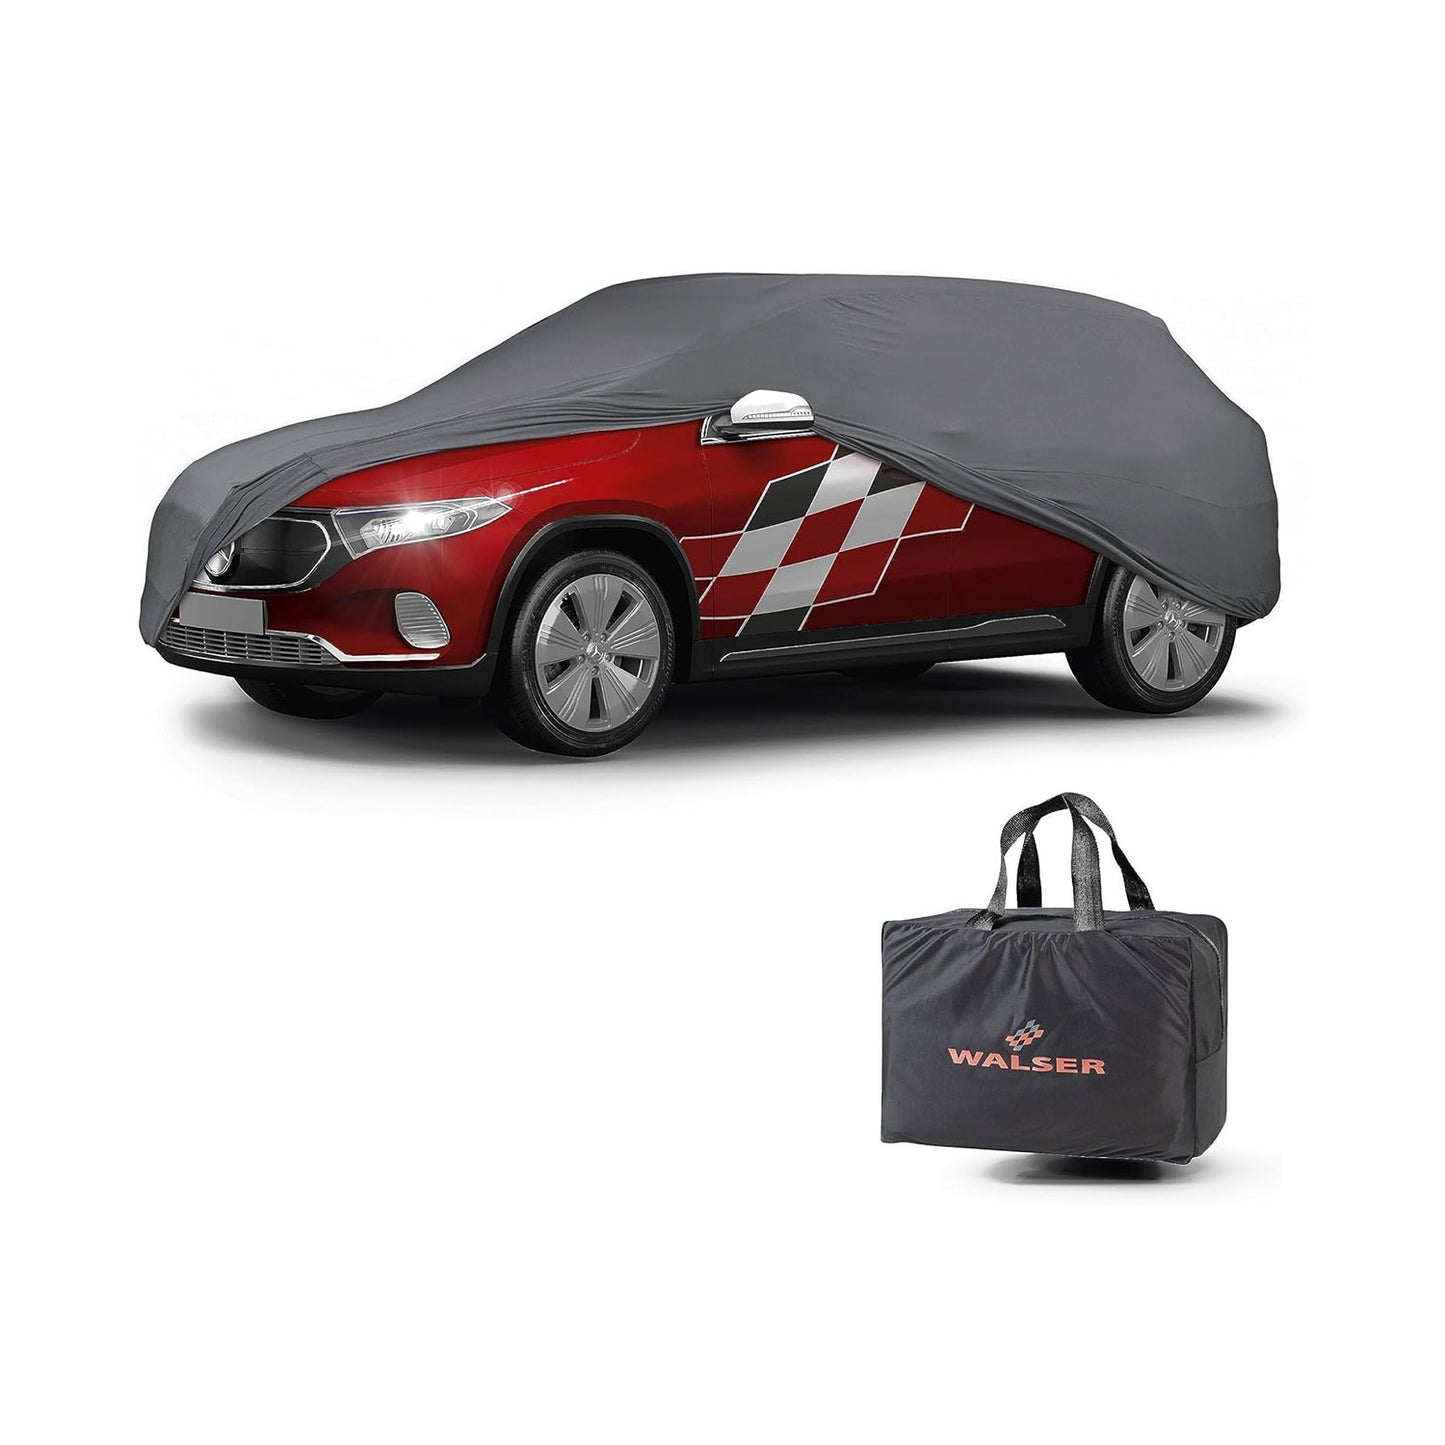 Indoor car cover from Walser